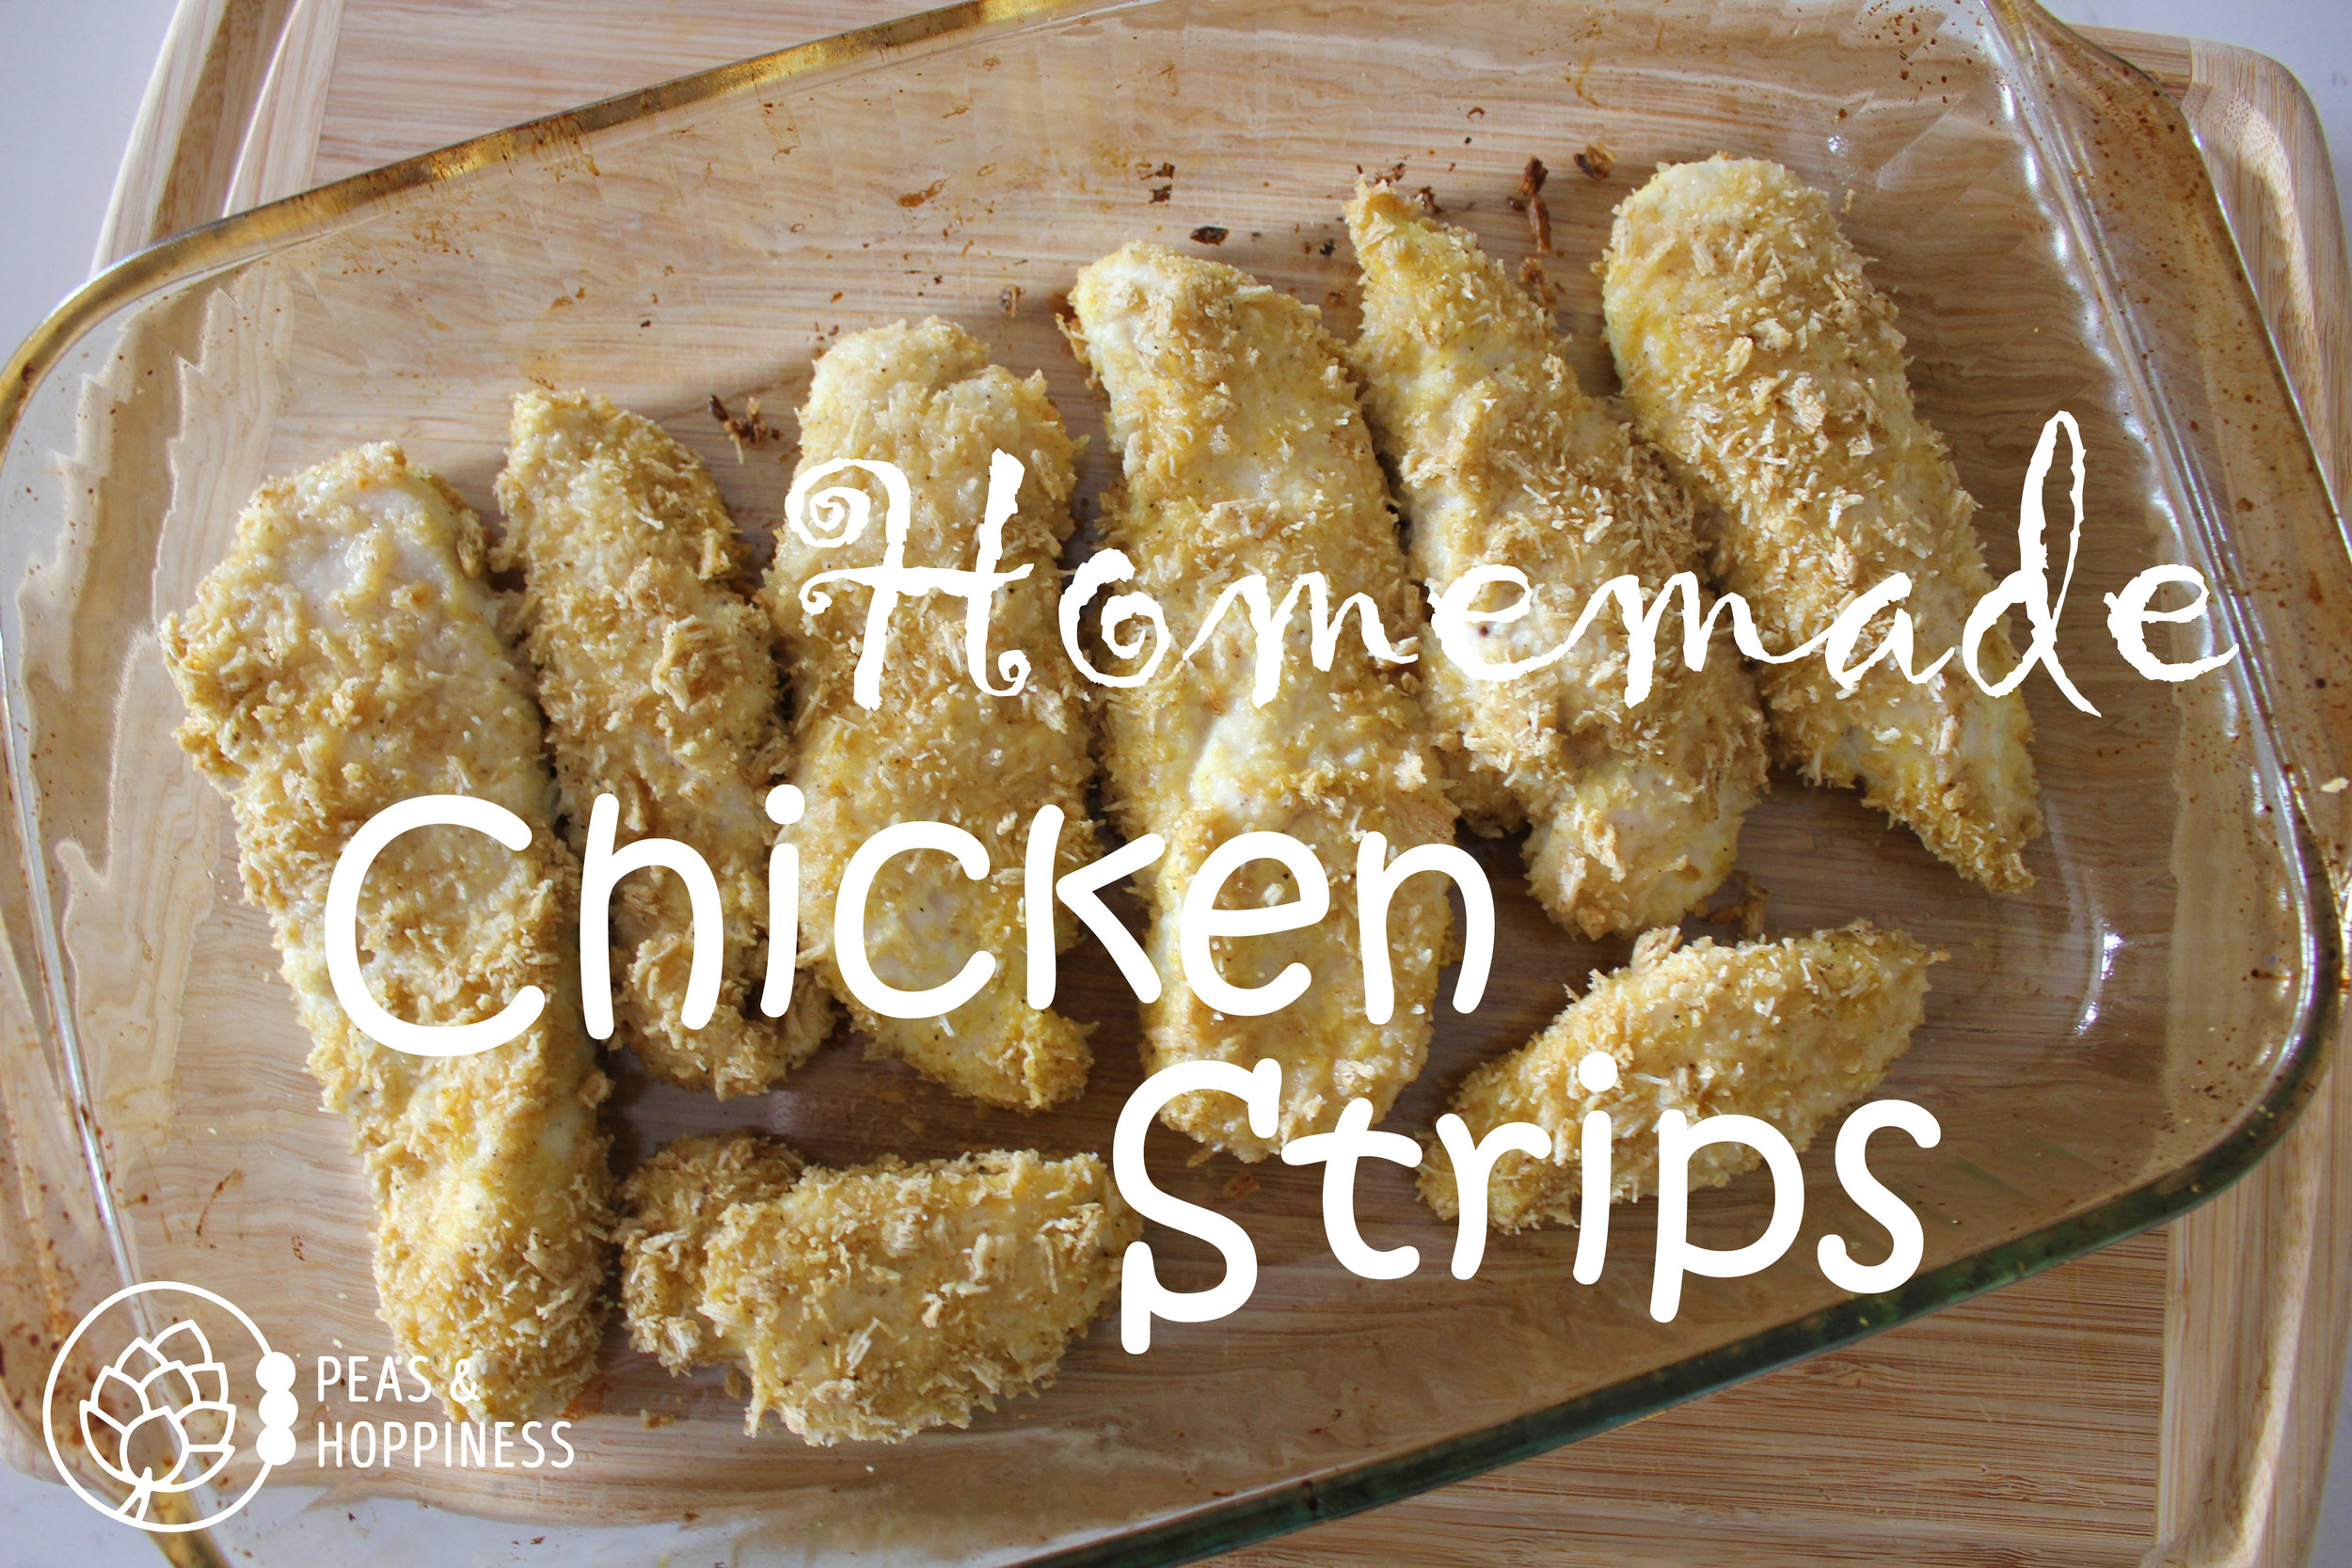 Homemade Chicken Strips from Peas and Hoppiness - www.peasandhoppiness.com